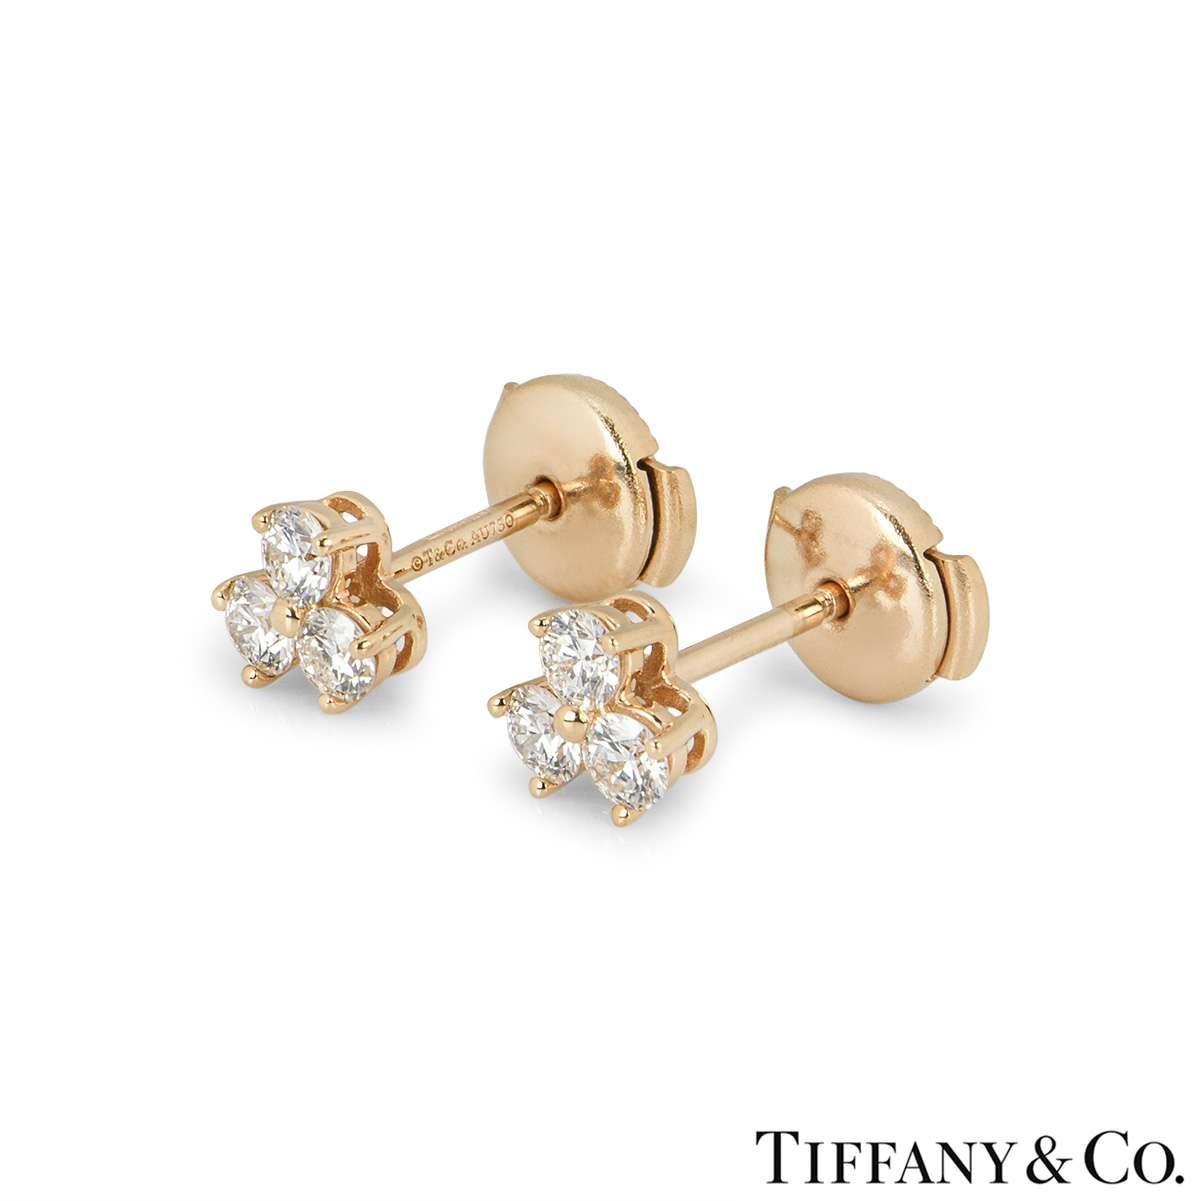 A pretty pair of 18k rose gold Tiffany & Co. diamond stud earrings from the Aria collection. Each earring features 3 round brilliant cut diamonds with a total weight of 0.58ct. The earrings measure 6mm in diameter. The earrings feature a post and